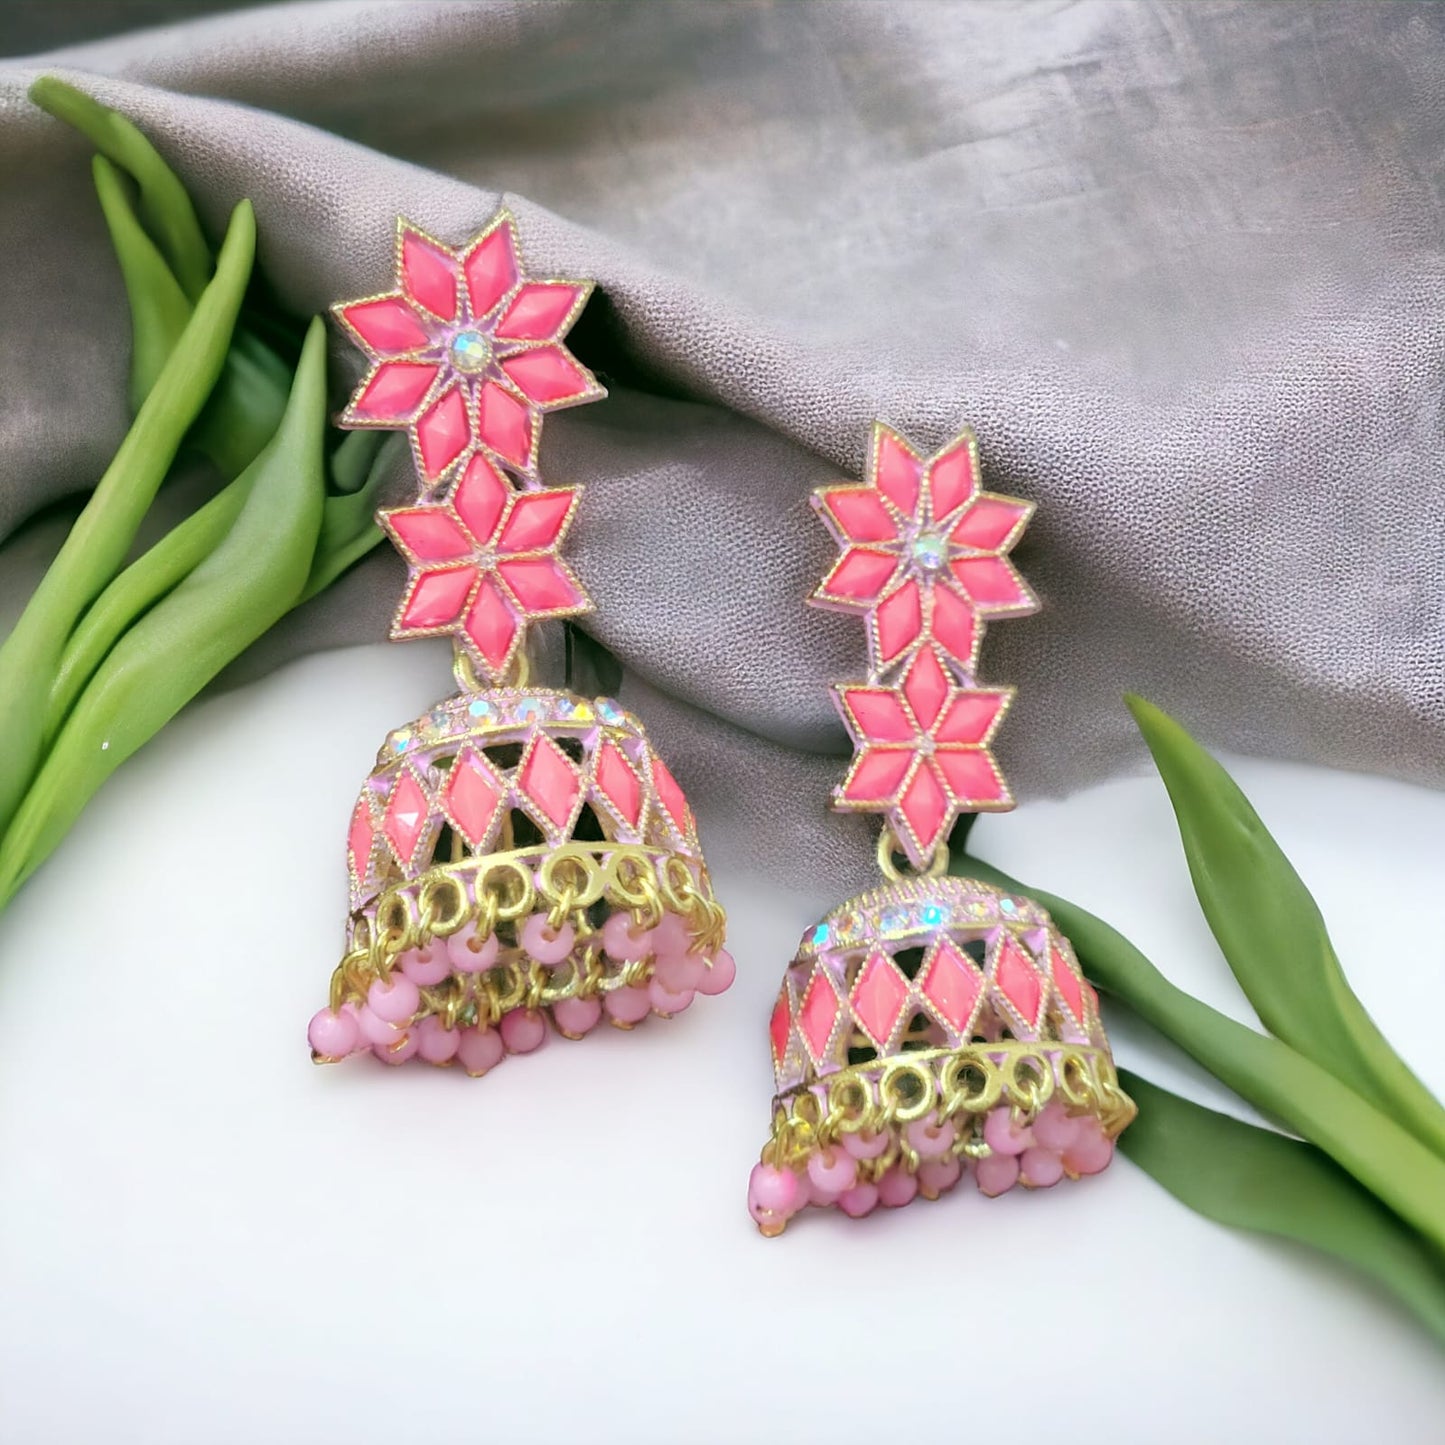 Carefully Crafted into Star-Shaped Pink Pearl Jhumka Earrings